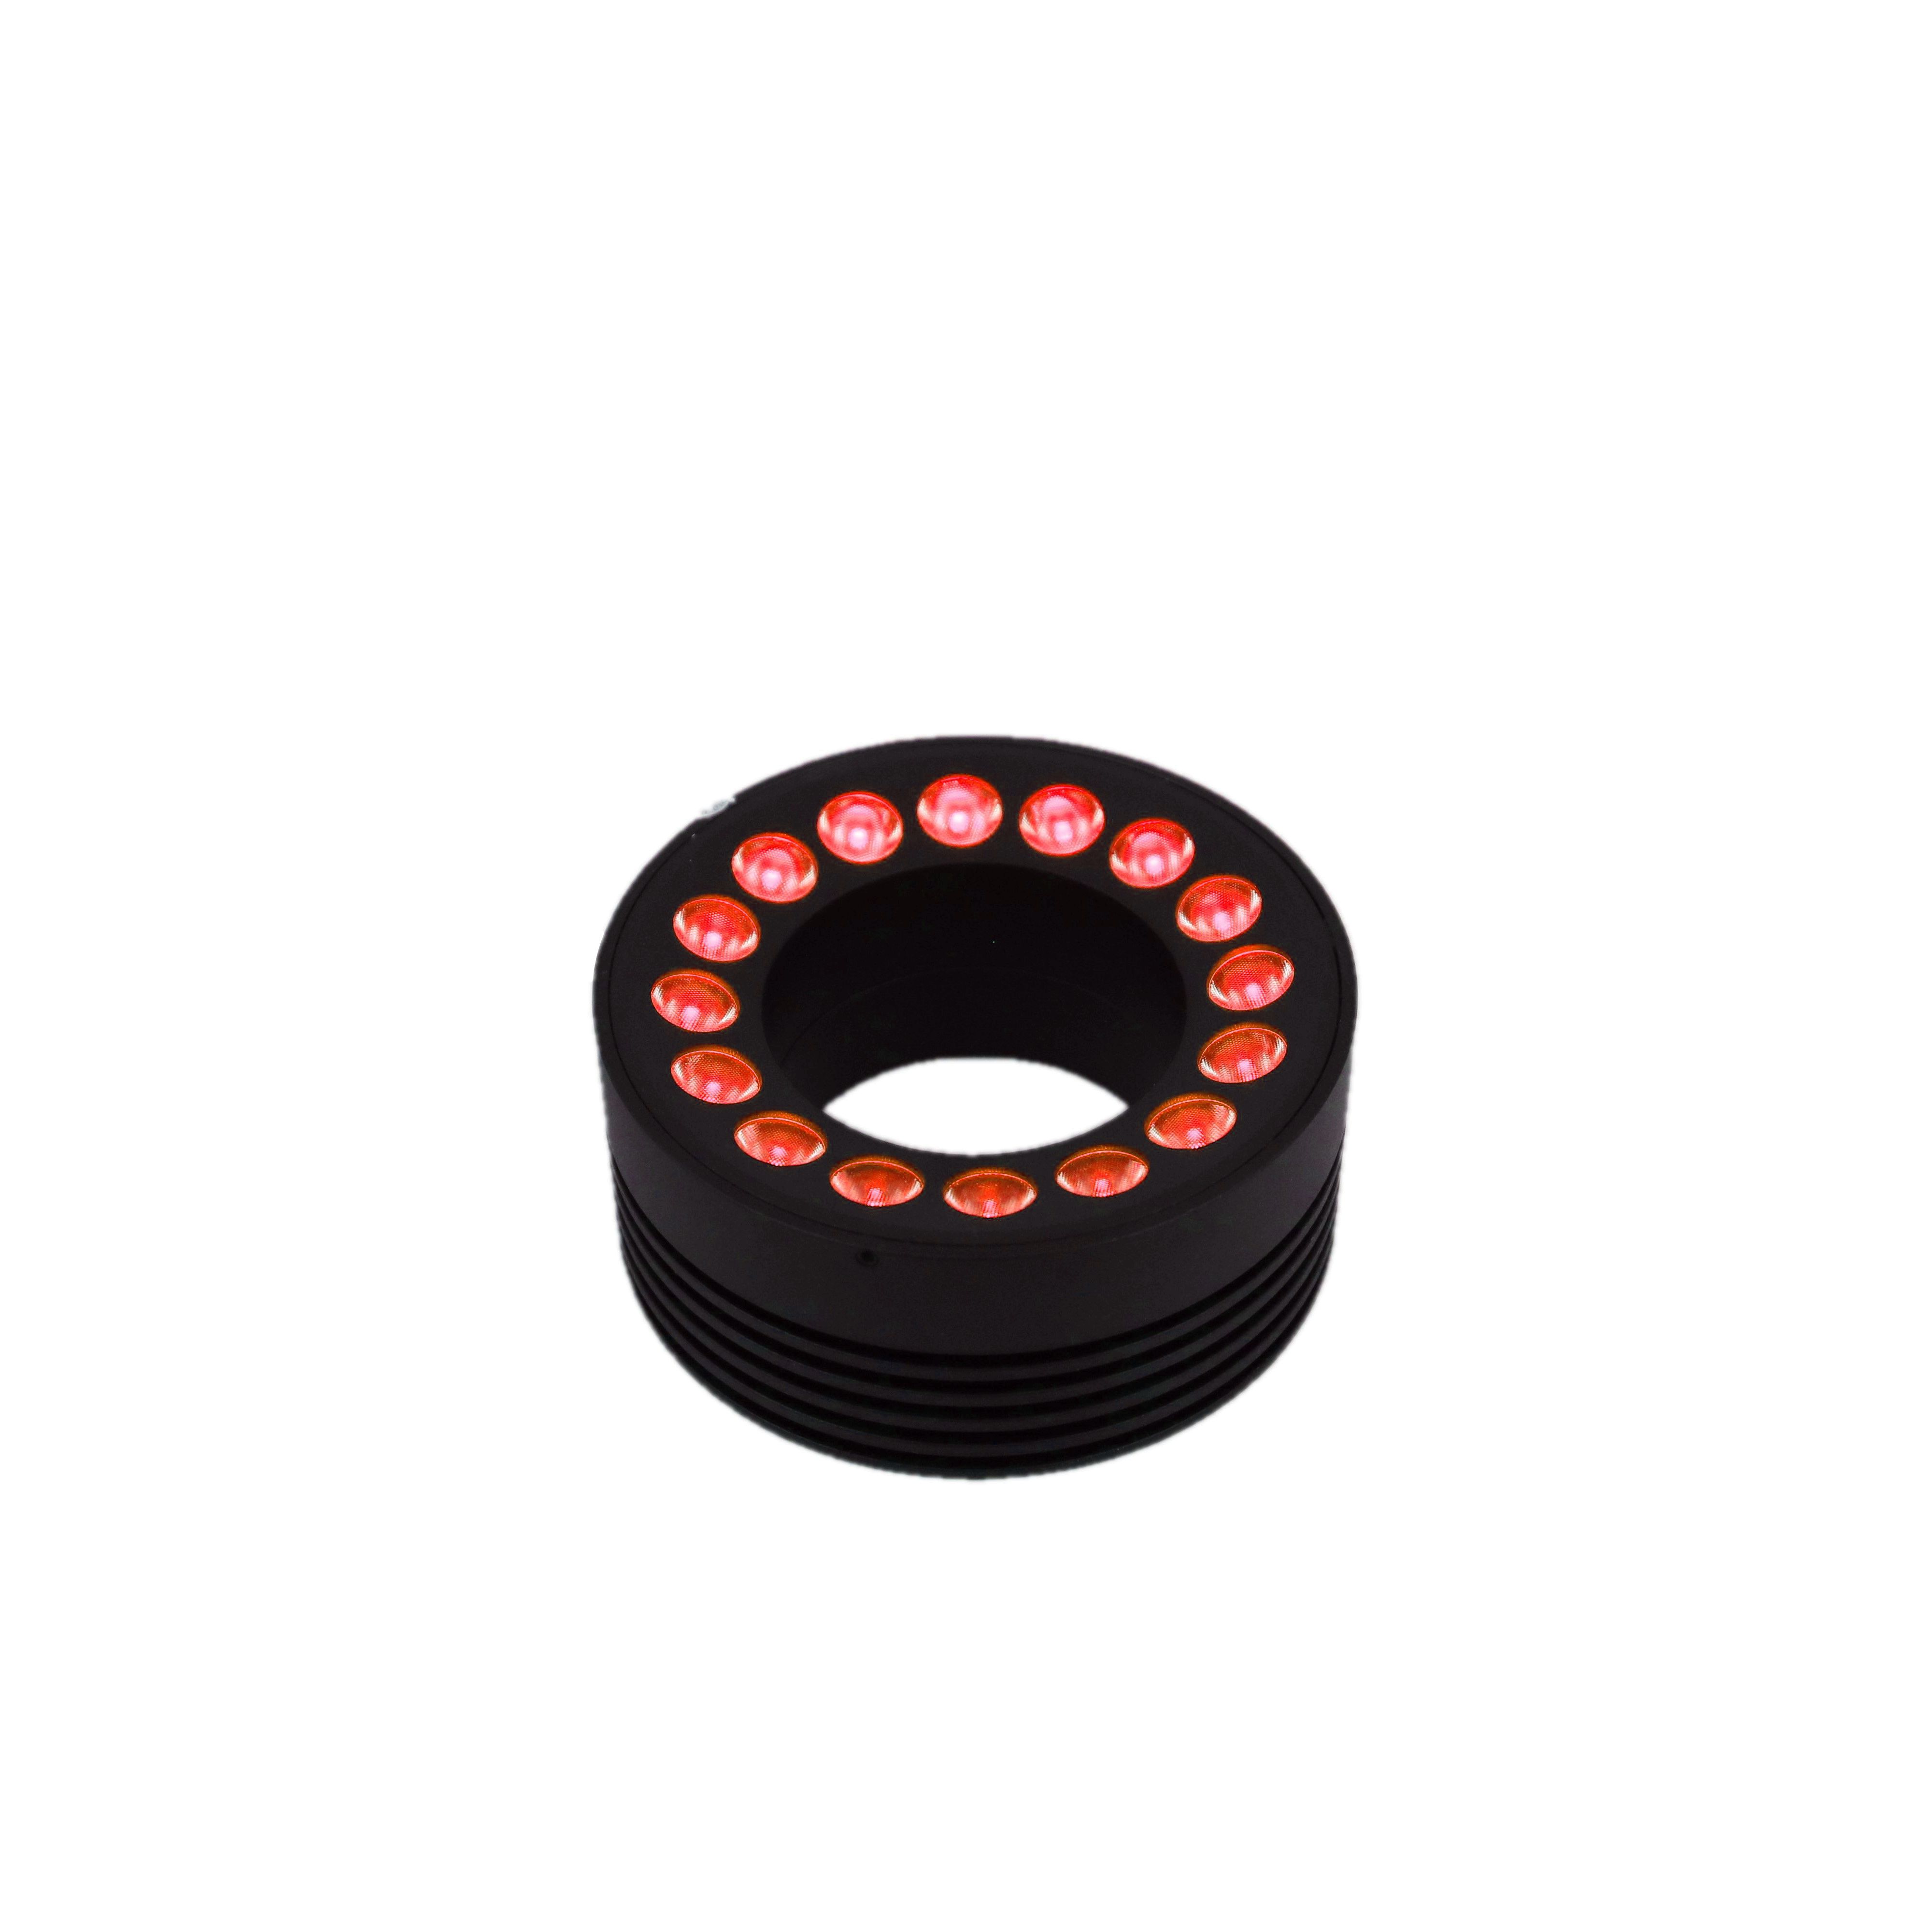 DRC-90/50 Direct Ring Series with High Power Illumination – Red